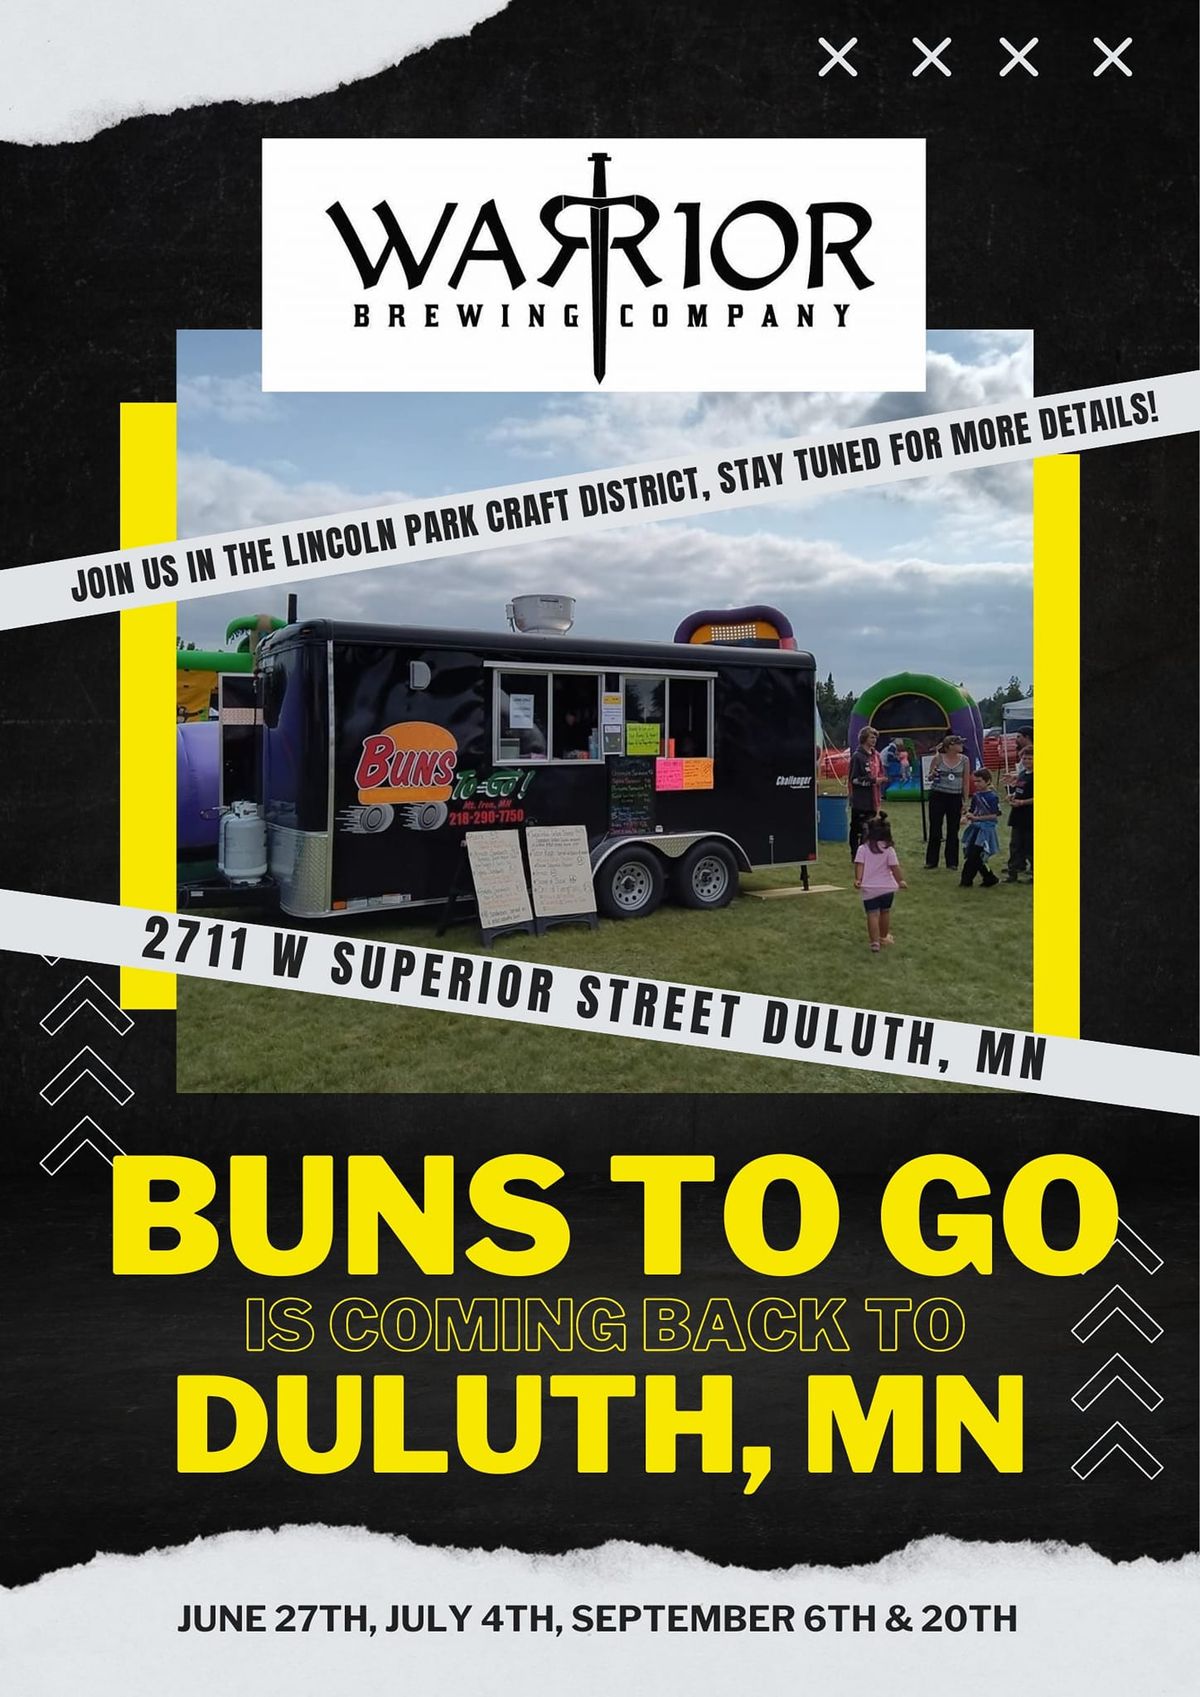 Buns heads to Warrior Brewing Co.